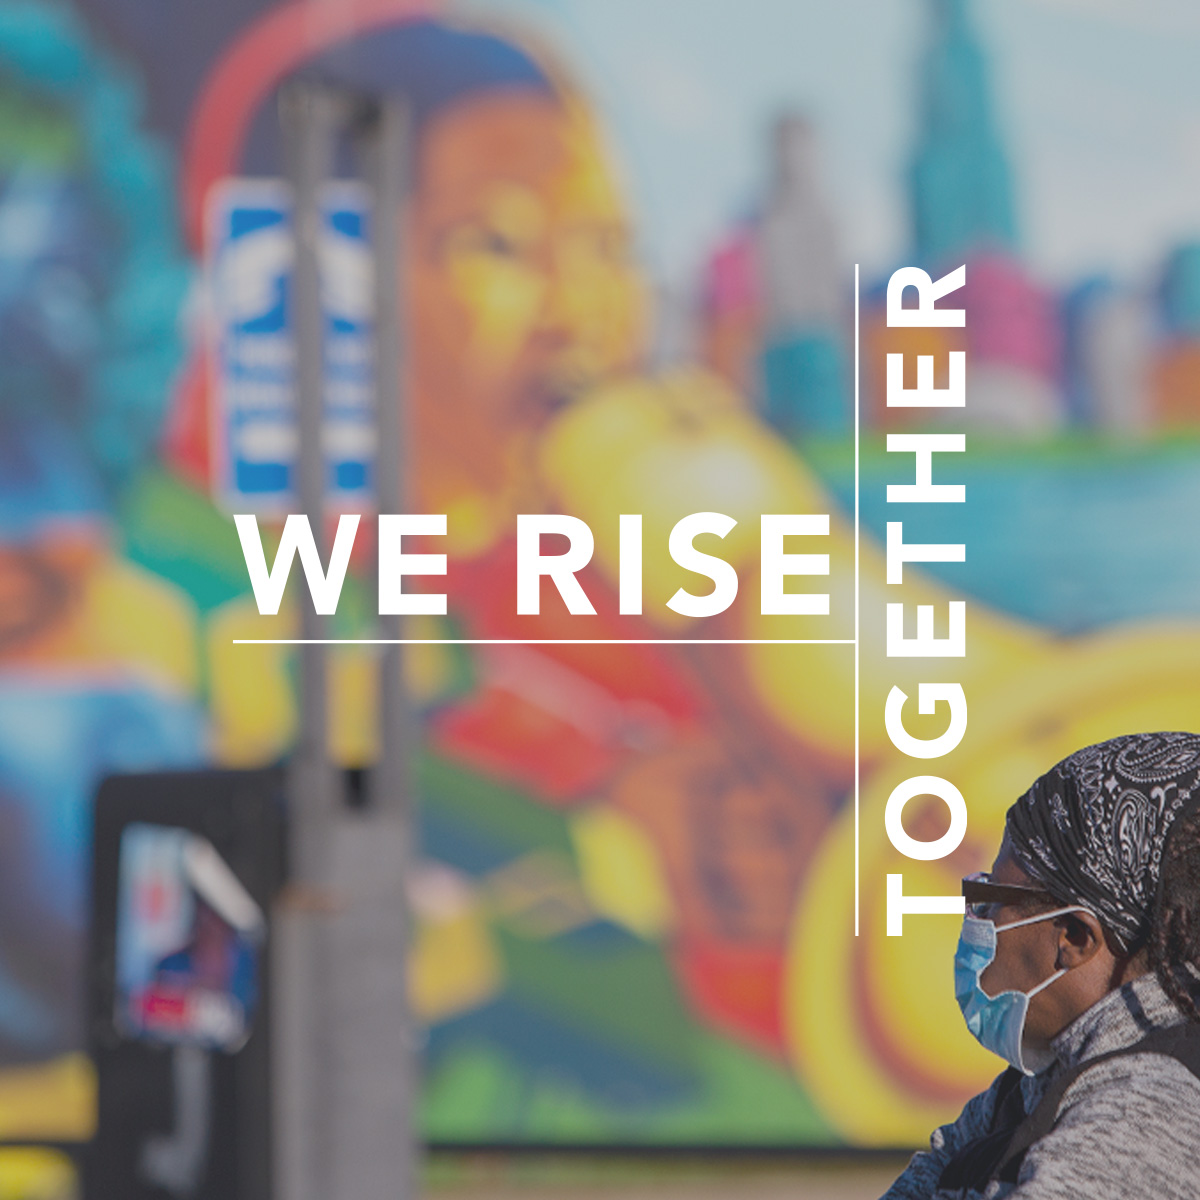 We rise together. Photo shows a black woman in a mask in front of a colorful mural.